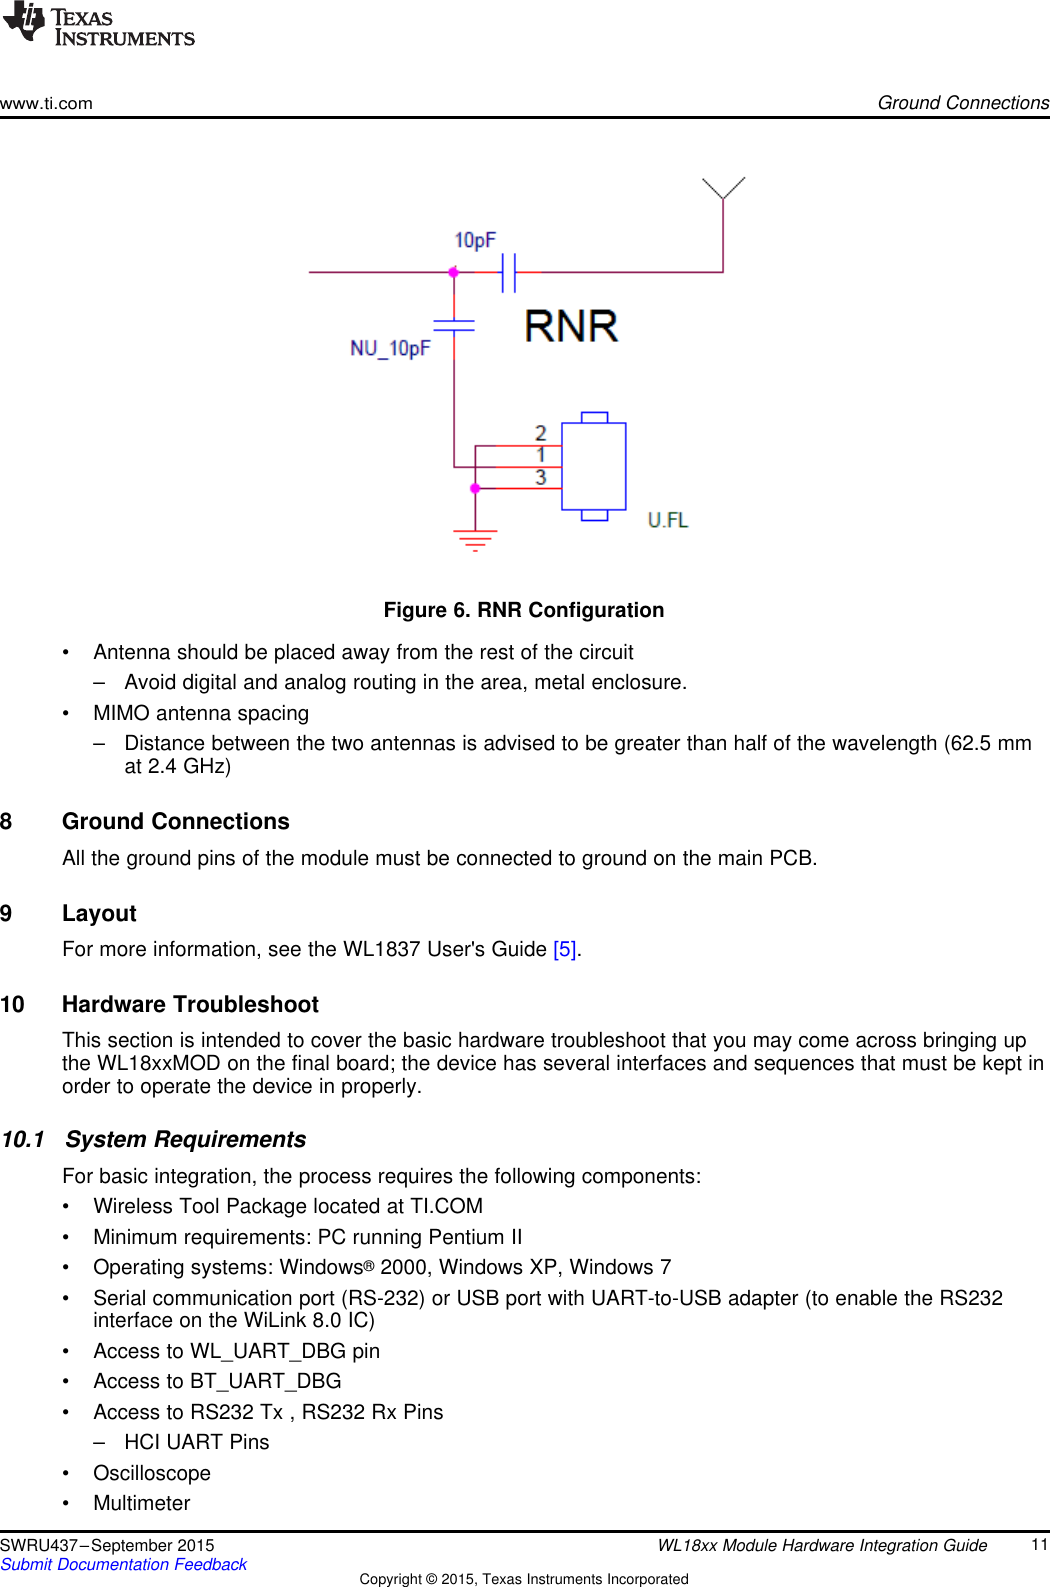 www.ti.comGround ConnectionsFigure 6. RNR Configuration• Antenna should be placed away from the rest of the circuit– Avoid digital and analog routing in the area, metal enclosure.• MIMO antenna spacing– Distance between the two antennas is advised to be greater than half of the wavelength (62.5 mmat 2.4 GHz)8 Ground ConnectionsAll the ground pins of the module must be connected to ground on the main PCB.9 LayoutFor more information, see the WL1837 User&apos;s Guide [5].10 Hardware TroubleshootThis section is intended to cover the basic hardware troubleshoot that you may come across bringing upthe WL18xxMOD on the final board; the device has several interfaces and sequences that must be kept inorder to operate the device in properly.10.1 System RequirementsFor basic integration, the process requires the following components:• Wireless Tool Package located at TI.COM• Minimum requirements: PC running Pentium II• Operating systems: Windows®2000, Windows XP, Windows 7• Serial communication port (RS-232) or USB port with UART-to-USB adapter (to enable the RS232interface on the WiLink 8.0 IC)• Access to WL_UART_DBG pin• Access to BT_UART_DBG• Access to RS232 Tx , RS232 Rx Pins– HCI UART Pins• Oscilloscope• Multimeter11SWRU437–September 2015 WL18xx Module Hardware Integration GuideSubmit Documentation Feedback Copyright © 2015, Texas Instruments Incorporated